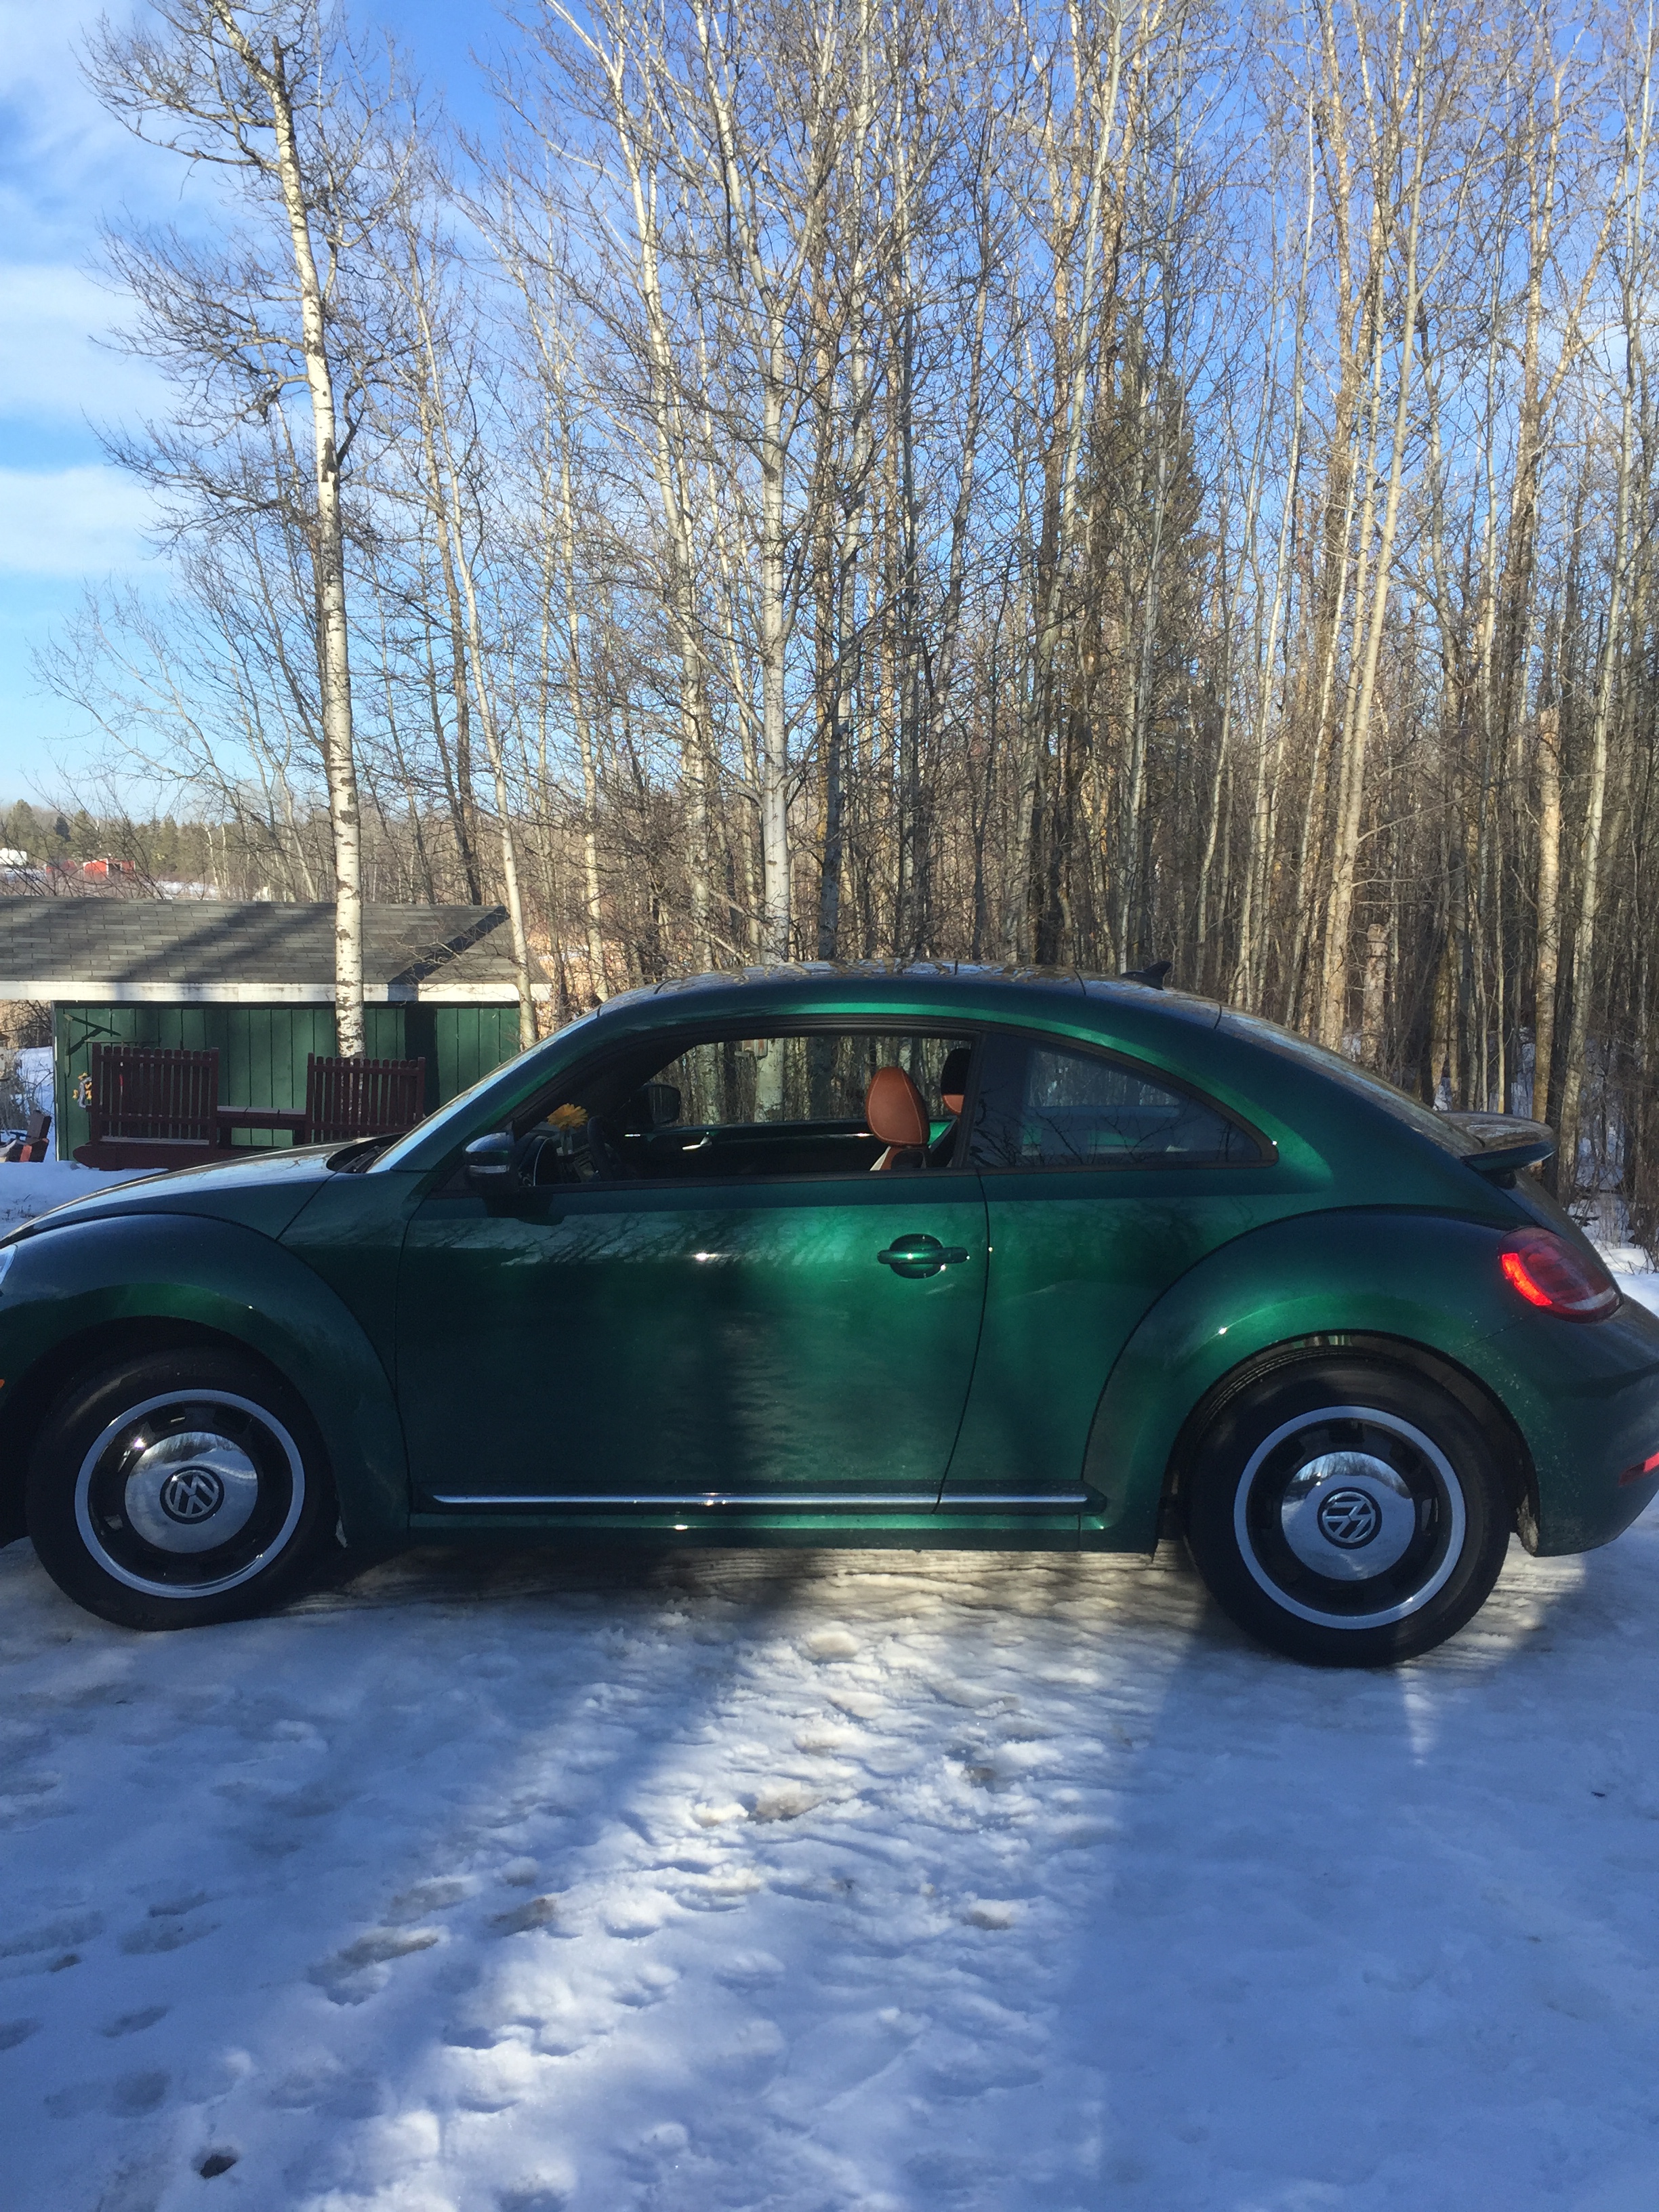 green punch buggy